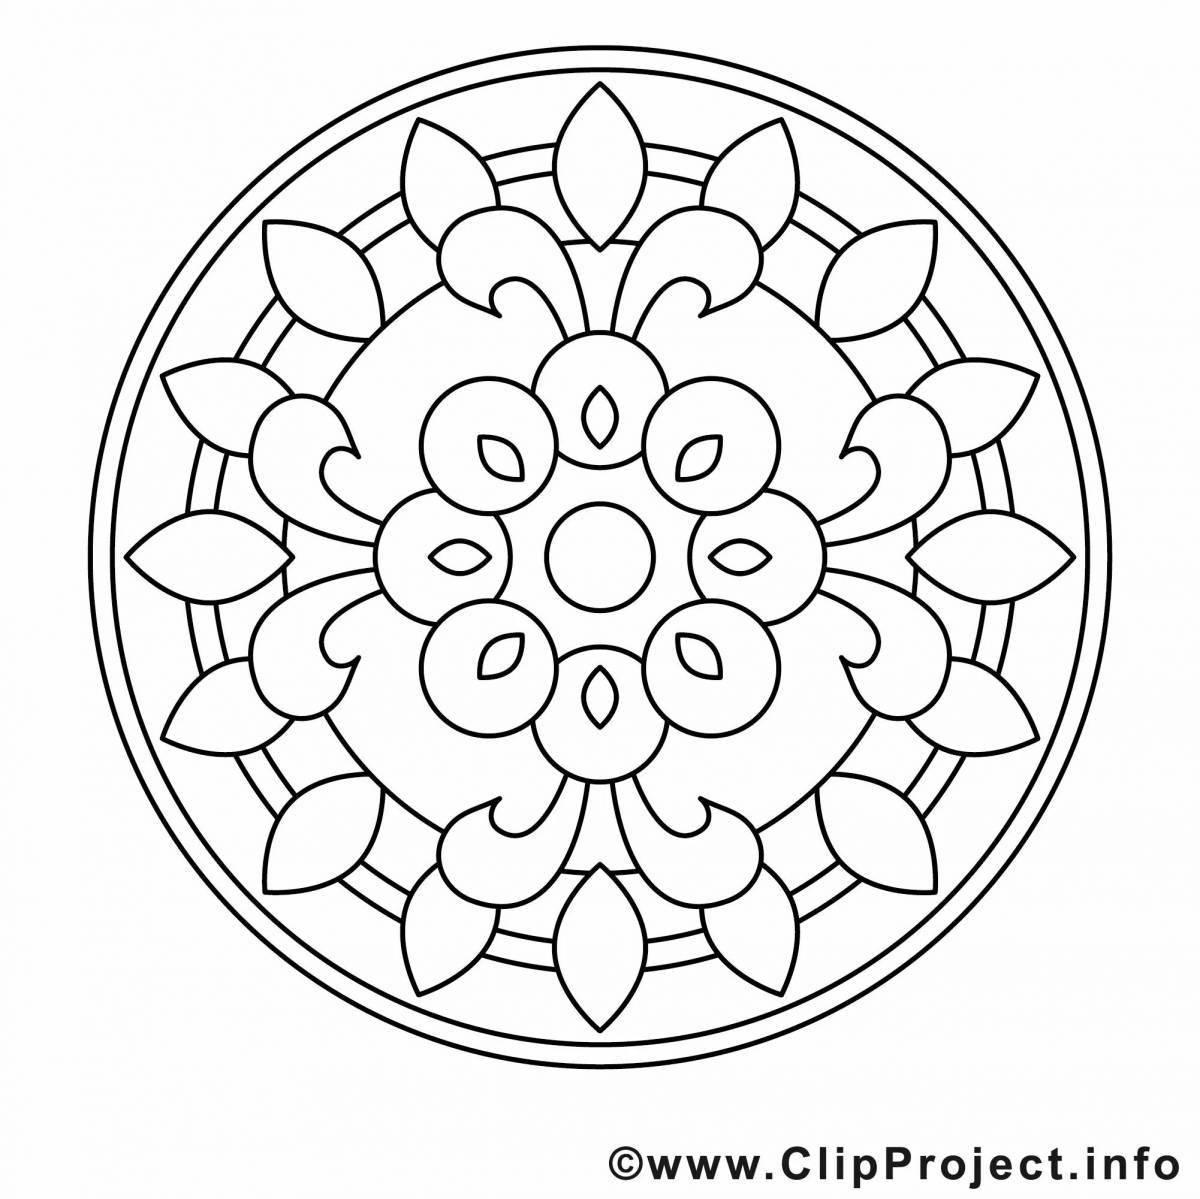 Joyful coloring plate for children 4-5 years old